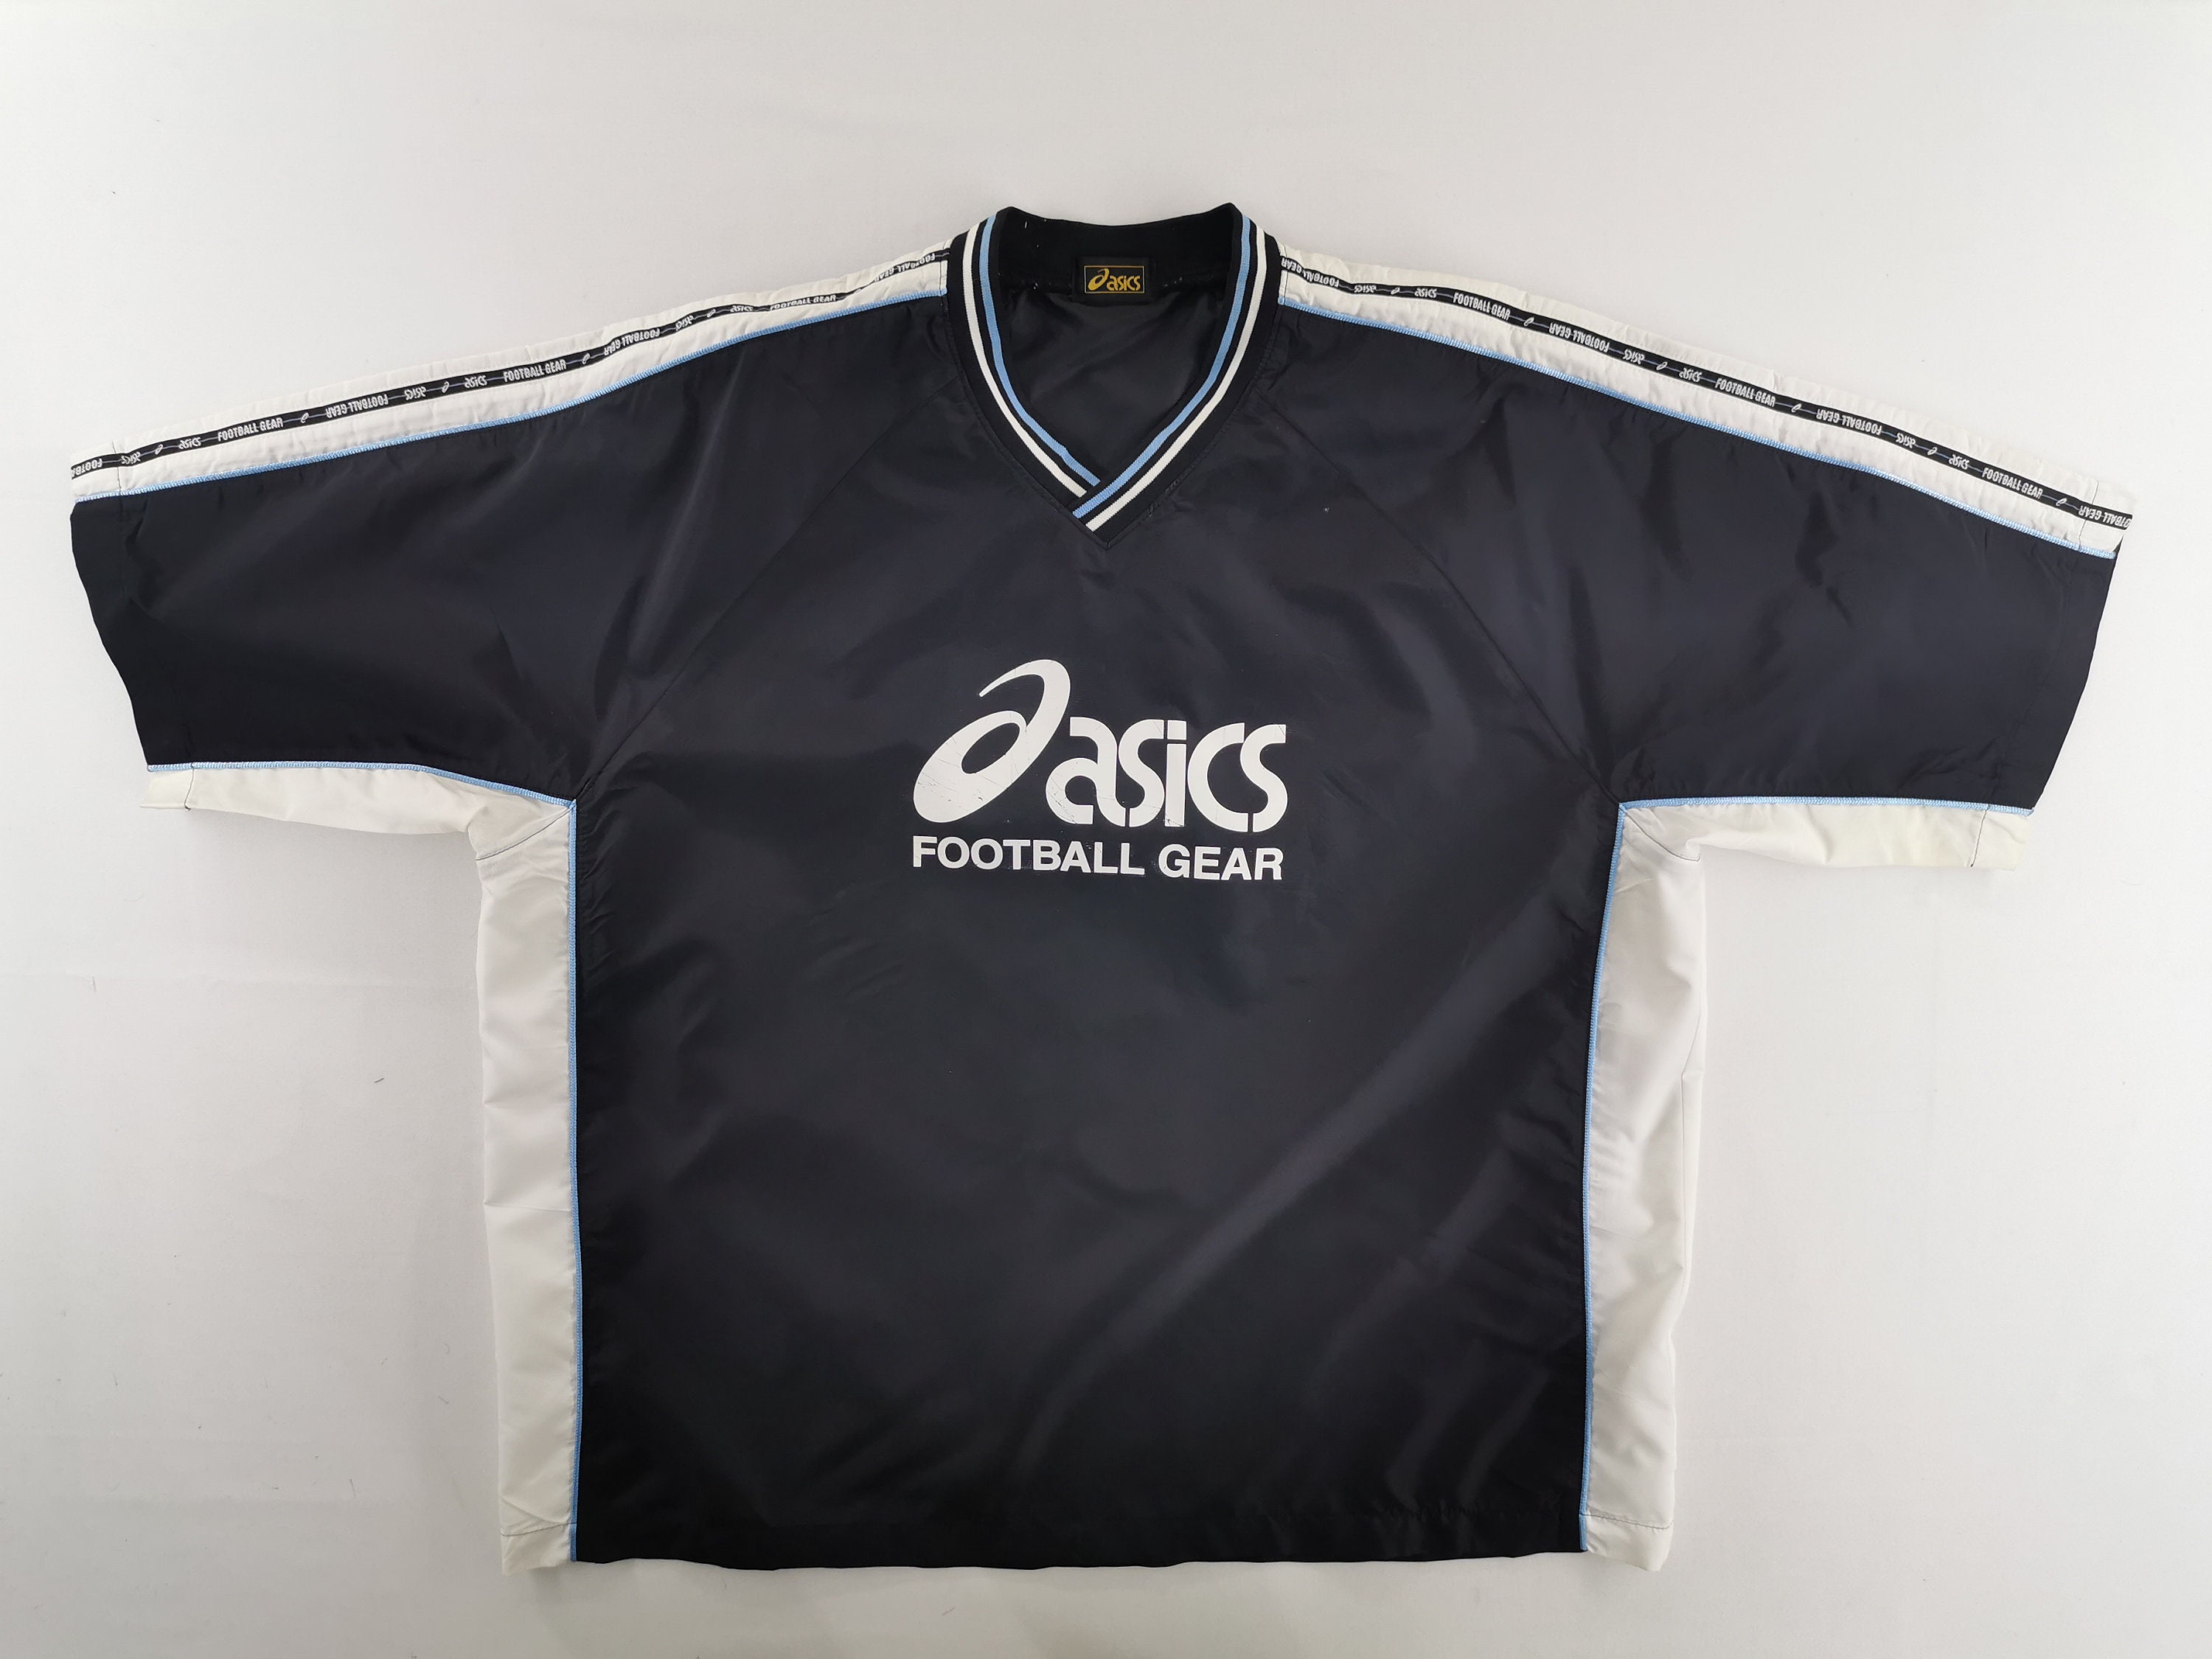 Vintage Football Jersey for sale